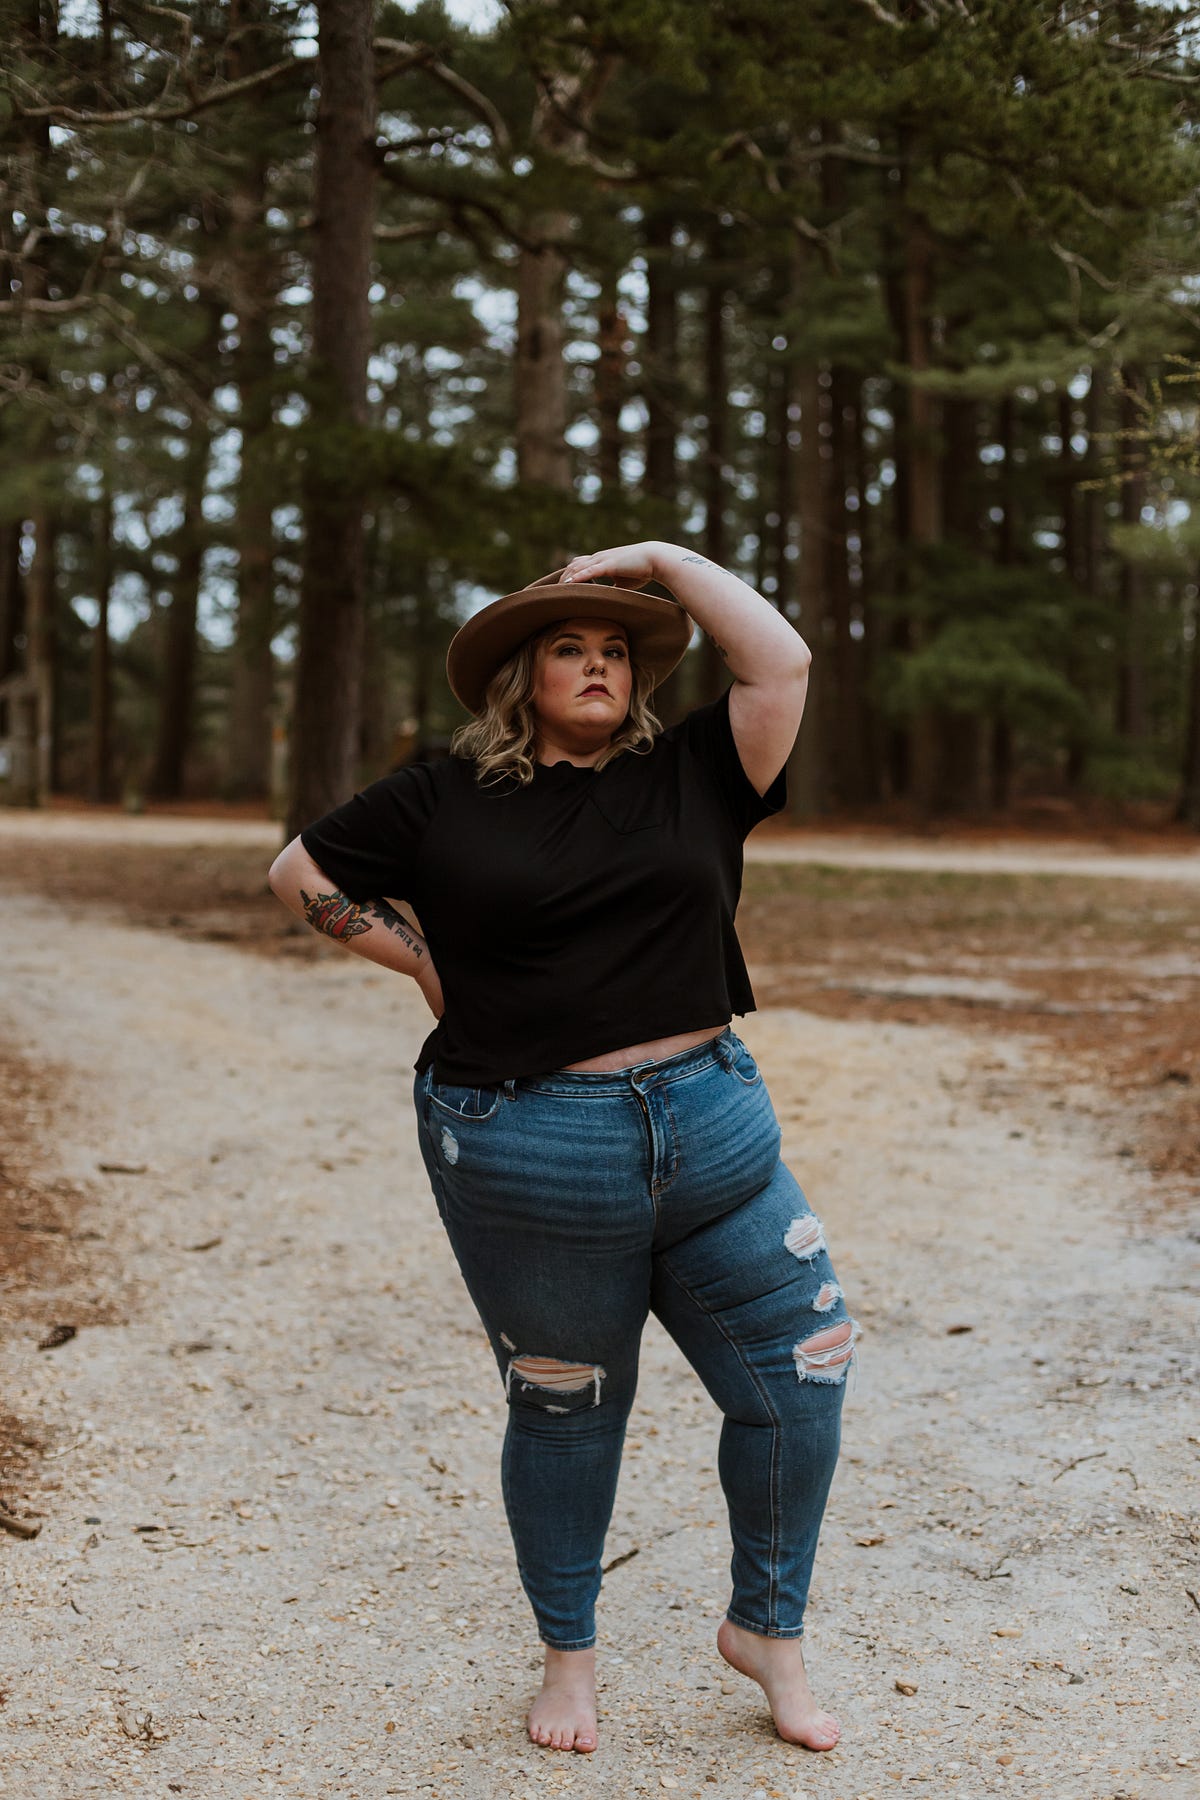 5 Things To Stop Saying To Fat People, by Brooklyn Reece